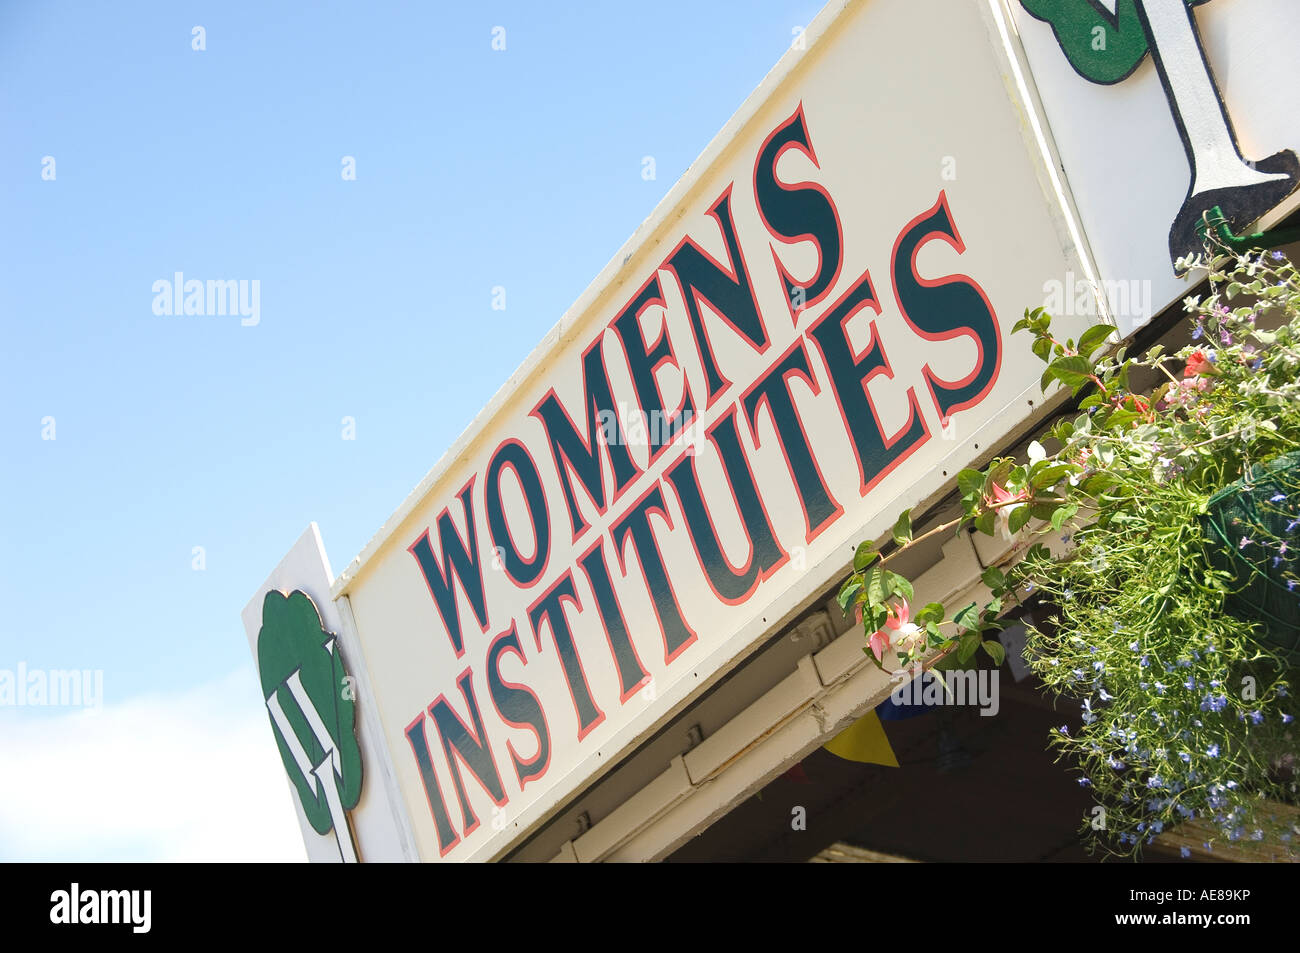 WI Womens Institute sign at the Great Yorkshire Show Harrogate North Yorkshire England UK United Kingdom GB Great Britain Stock Photo